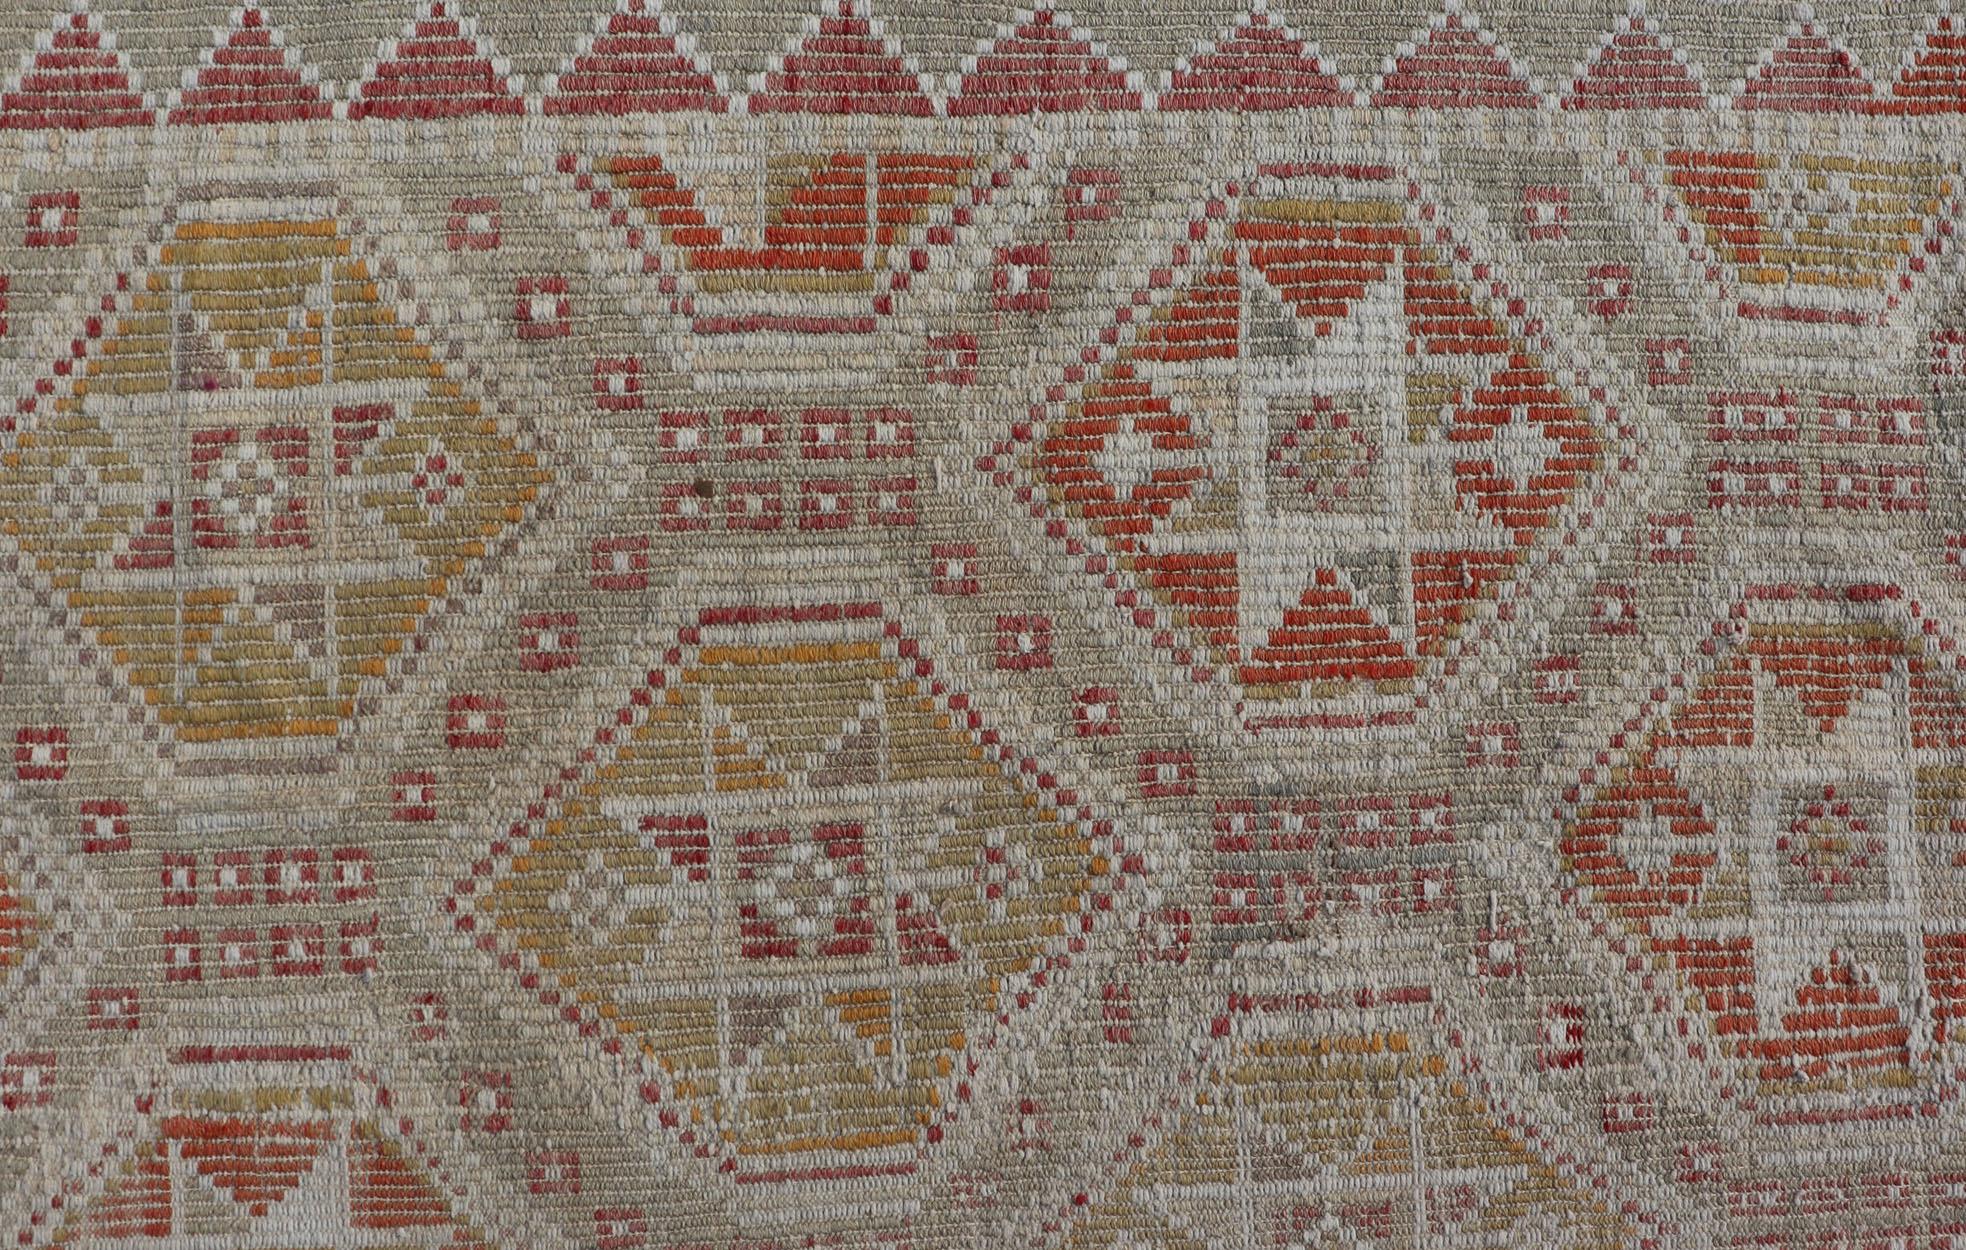 Measures: 6'1 x 8'5 
Turkish Vintage Kilim with All-Over Geometric Diamond Design With Red & Orange. Keivan Woven Arts / rug TU-NED-5041, country of origin / type: Turkey / Kilim, circa Mid-20th Century.
This geometric embroidered flat weave from